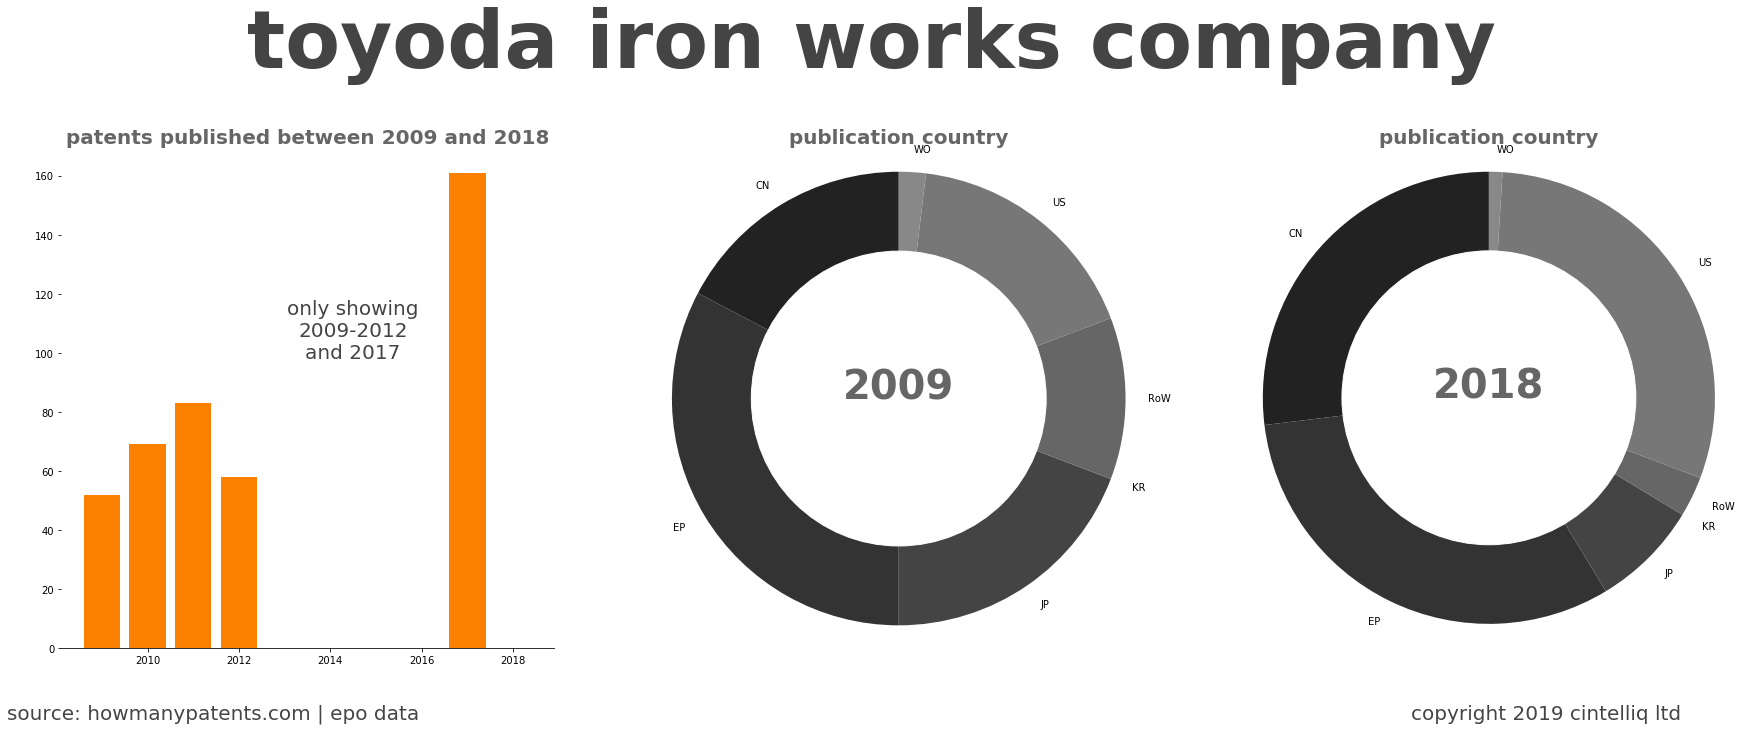 summary of patents for Toyoda Iron Works Company